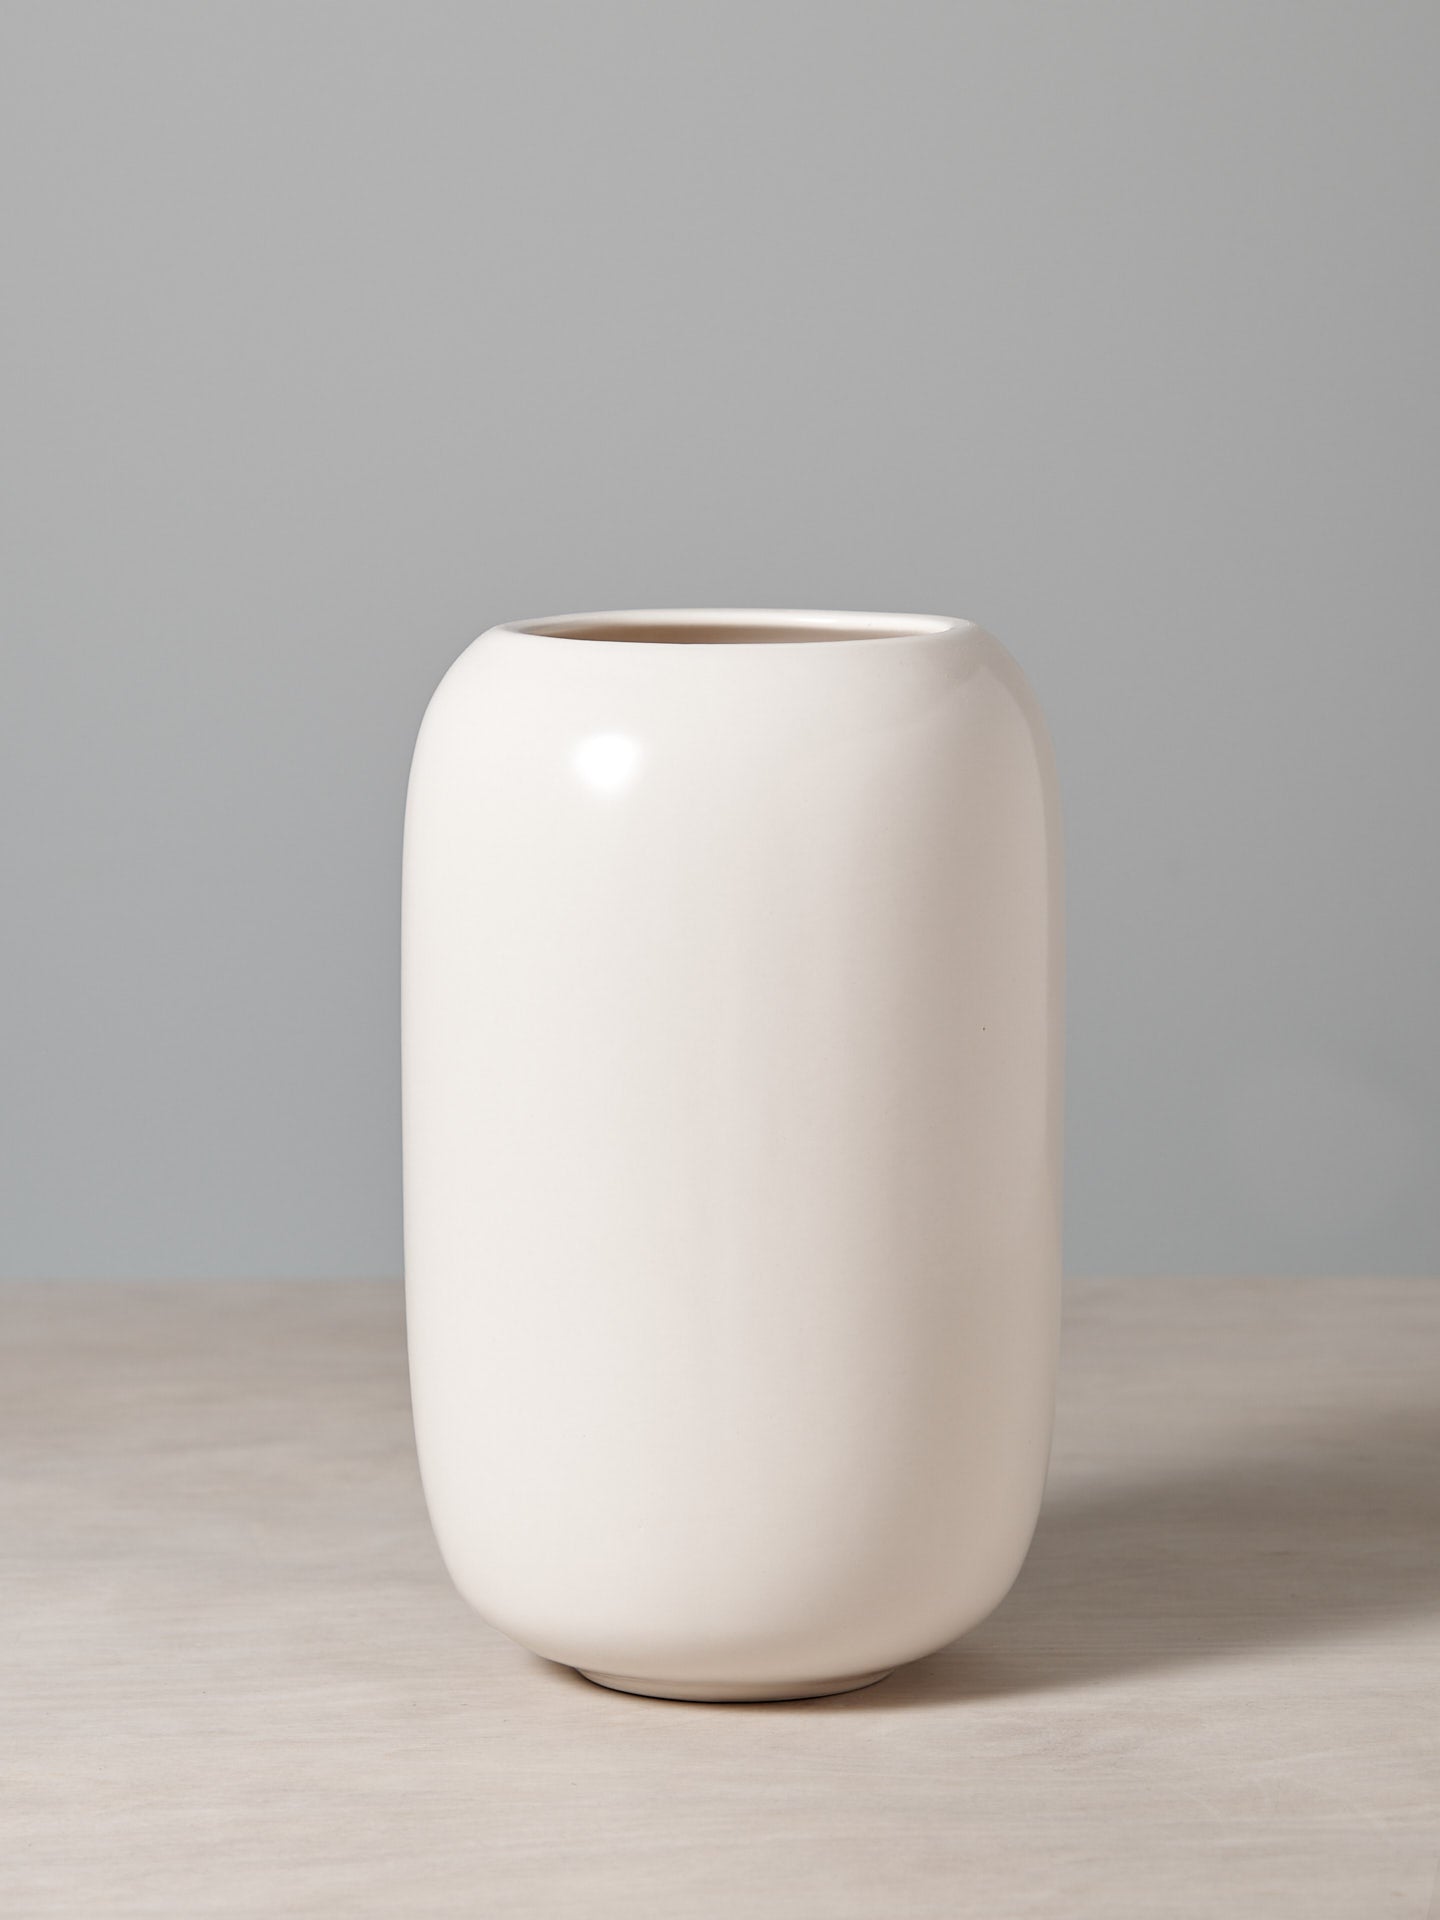 An Ovum Vase - Satin White by Gidon Bing sitting on top of a table.